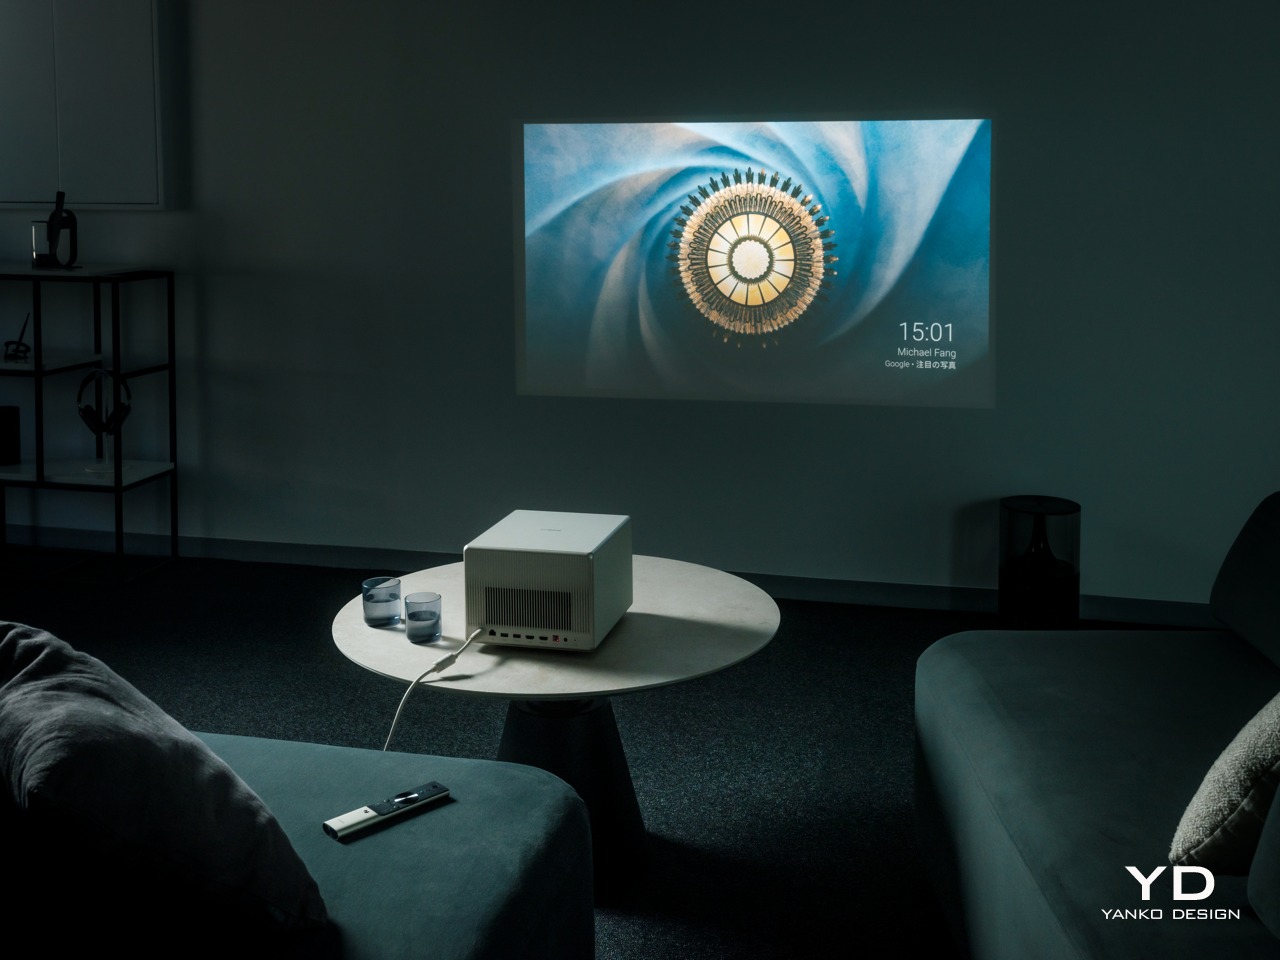 XGIMI Releases Horizon Ultra Projector with Advanced Hybrid Light